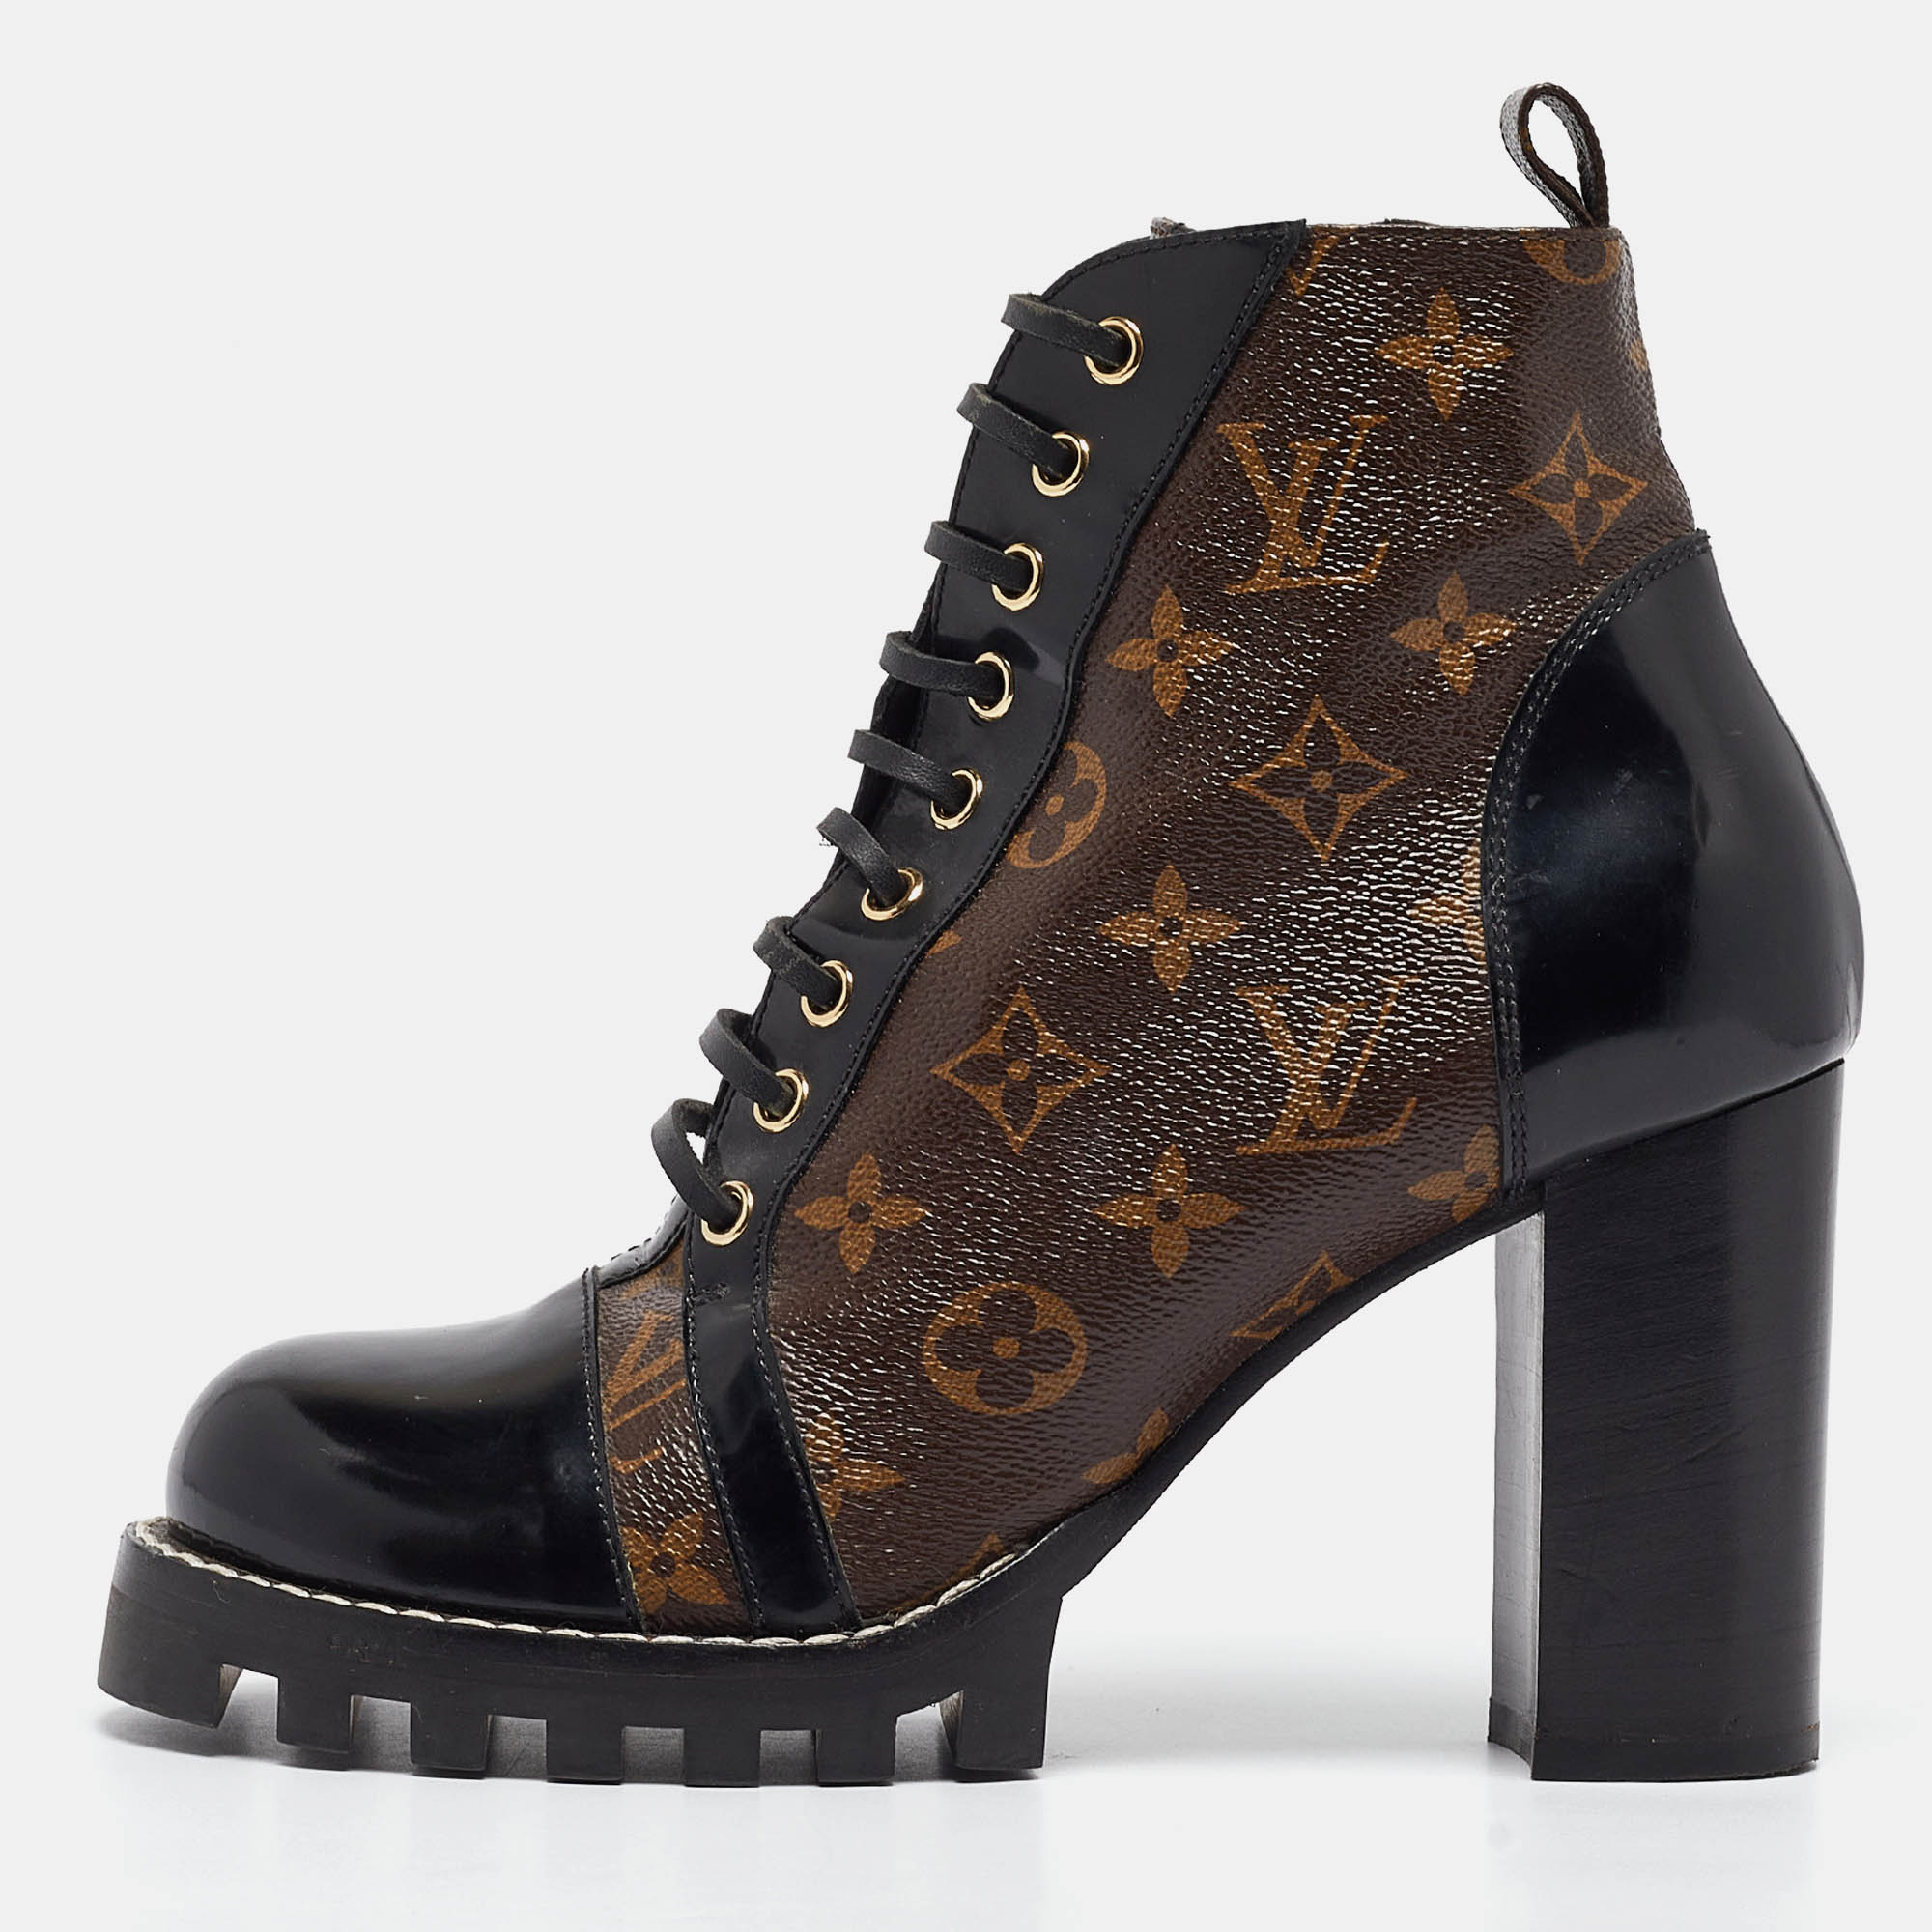 Louis vuitton brown/black leather and monogram coated canvas star trail block heel ankle boots size 40